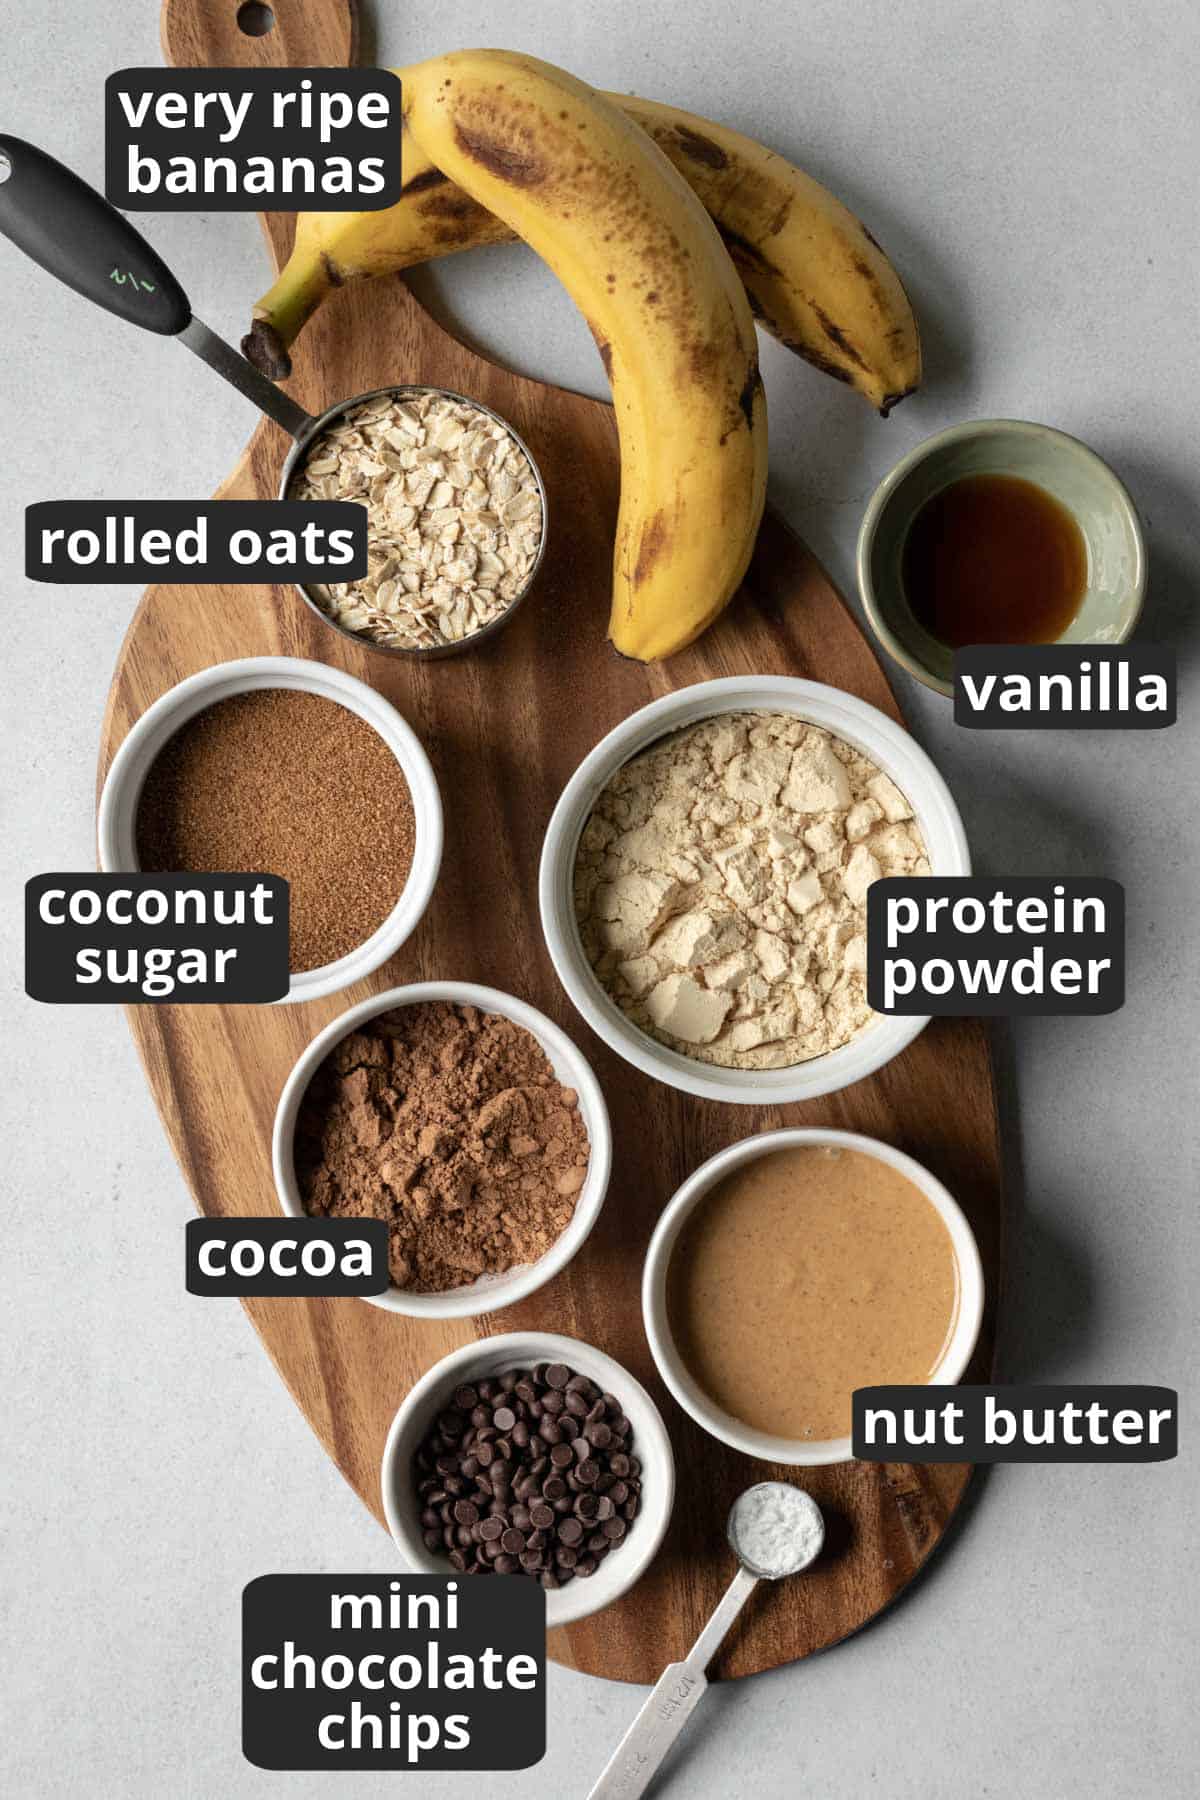 ingredients laid out on a wooden board.